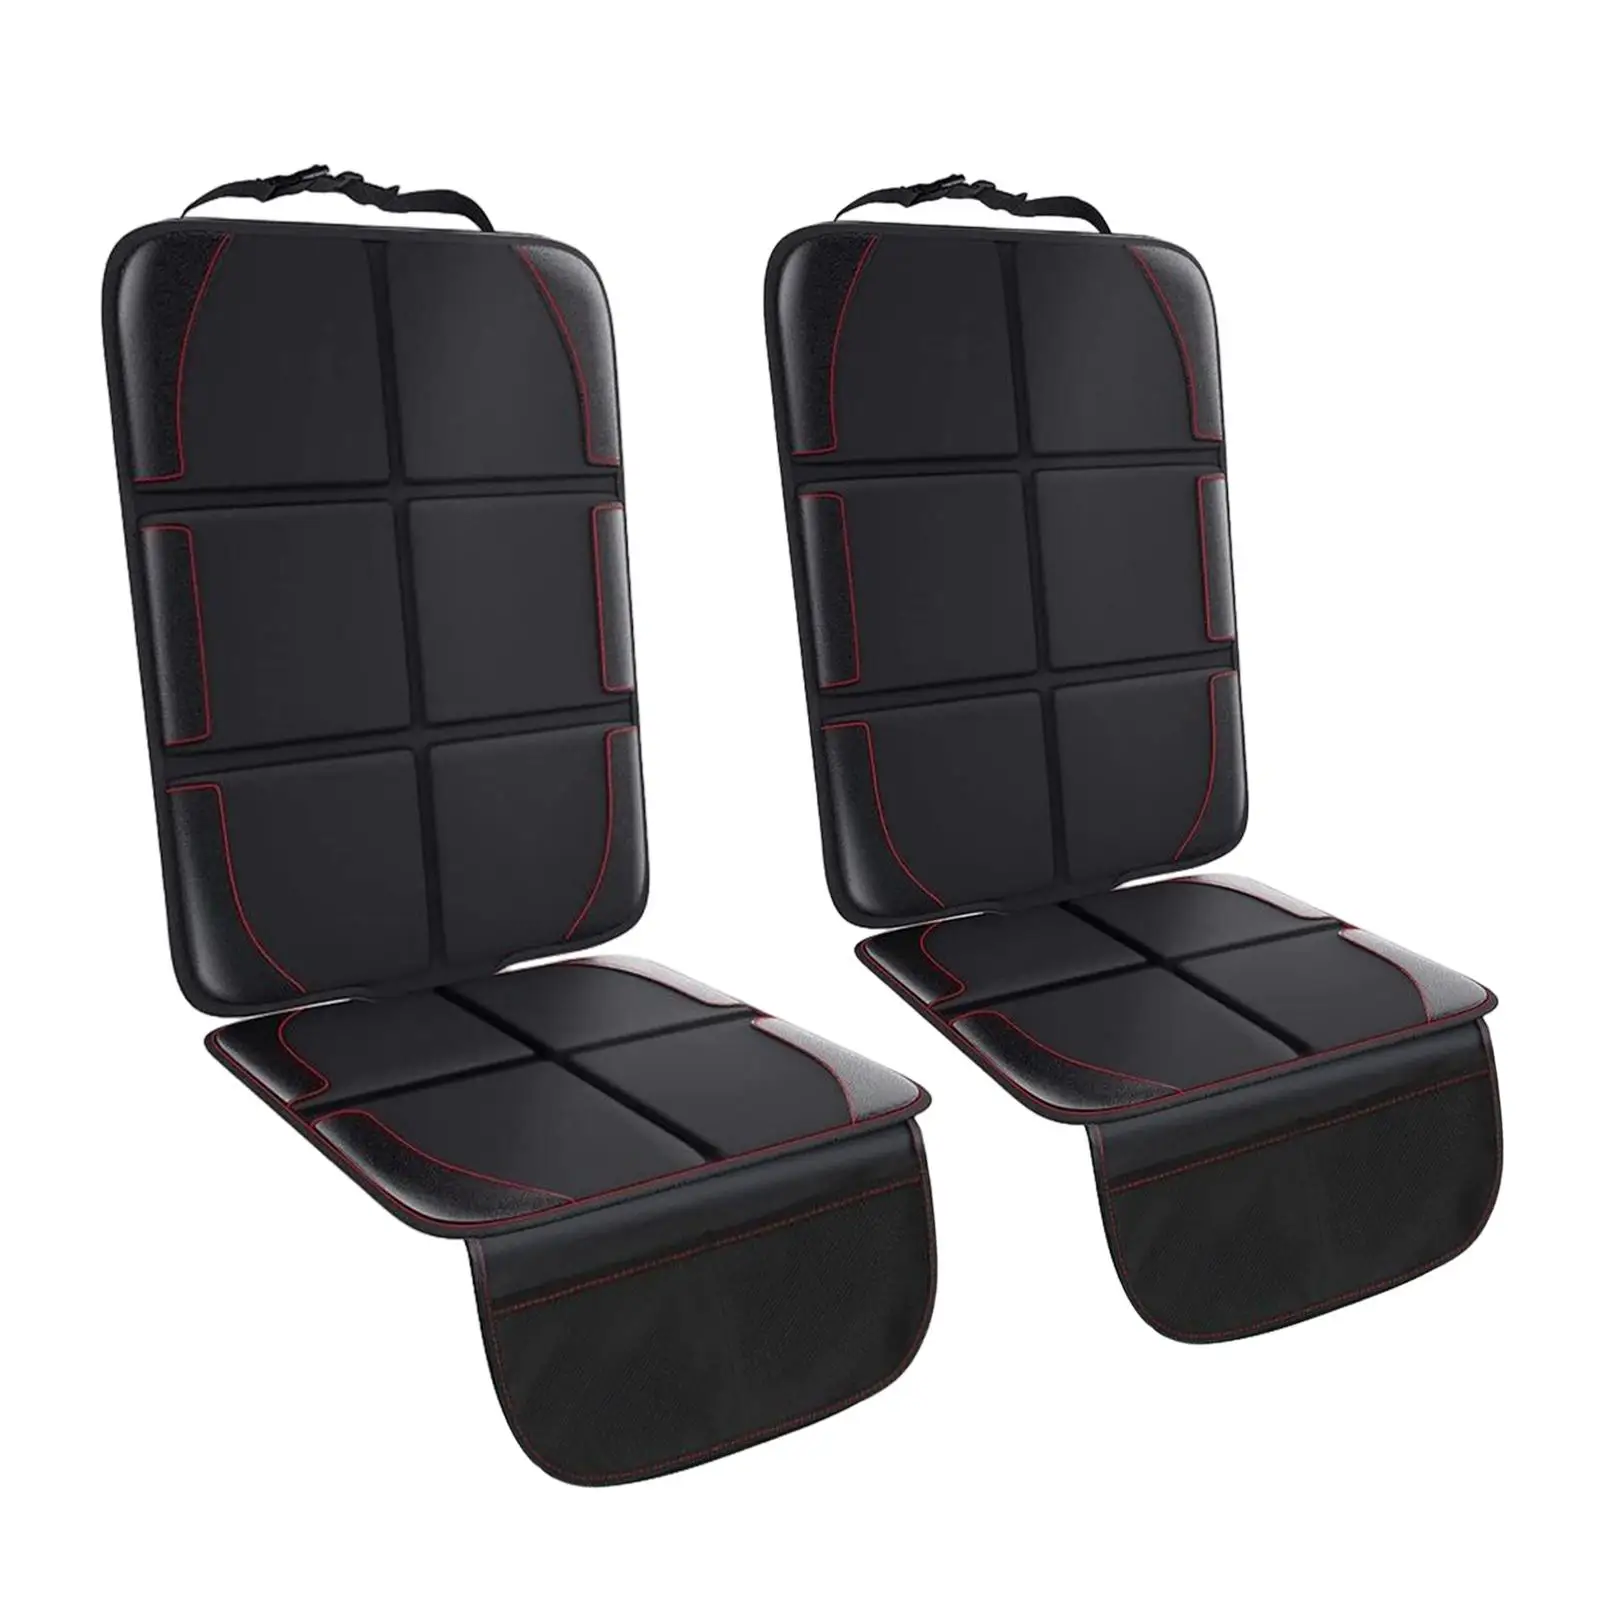 Auto Car Seat Protectors Cushion Waterproof with Storage Pockets for Truck SUV Child Safety